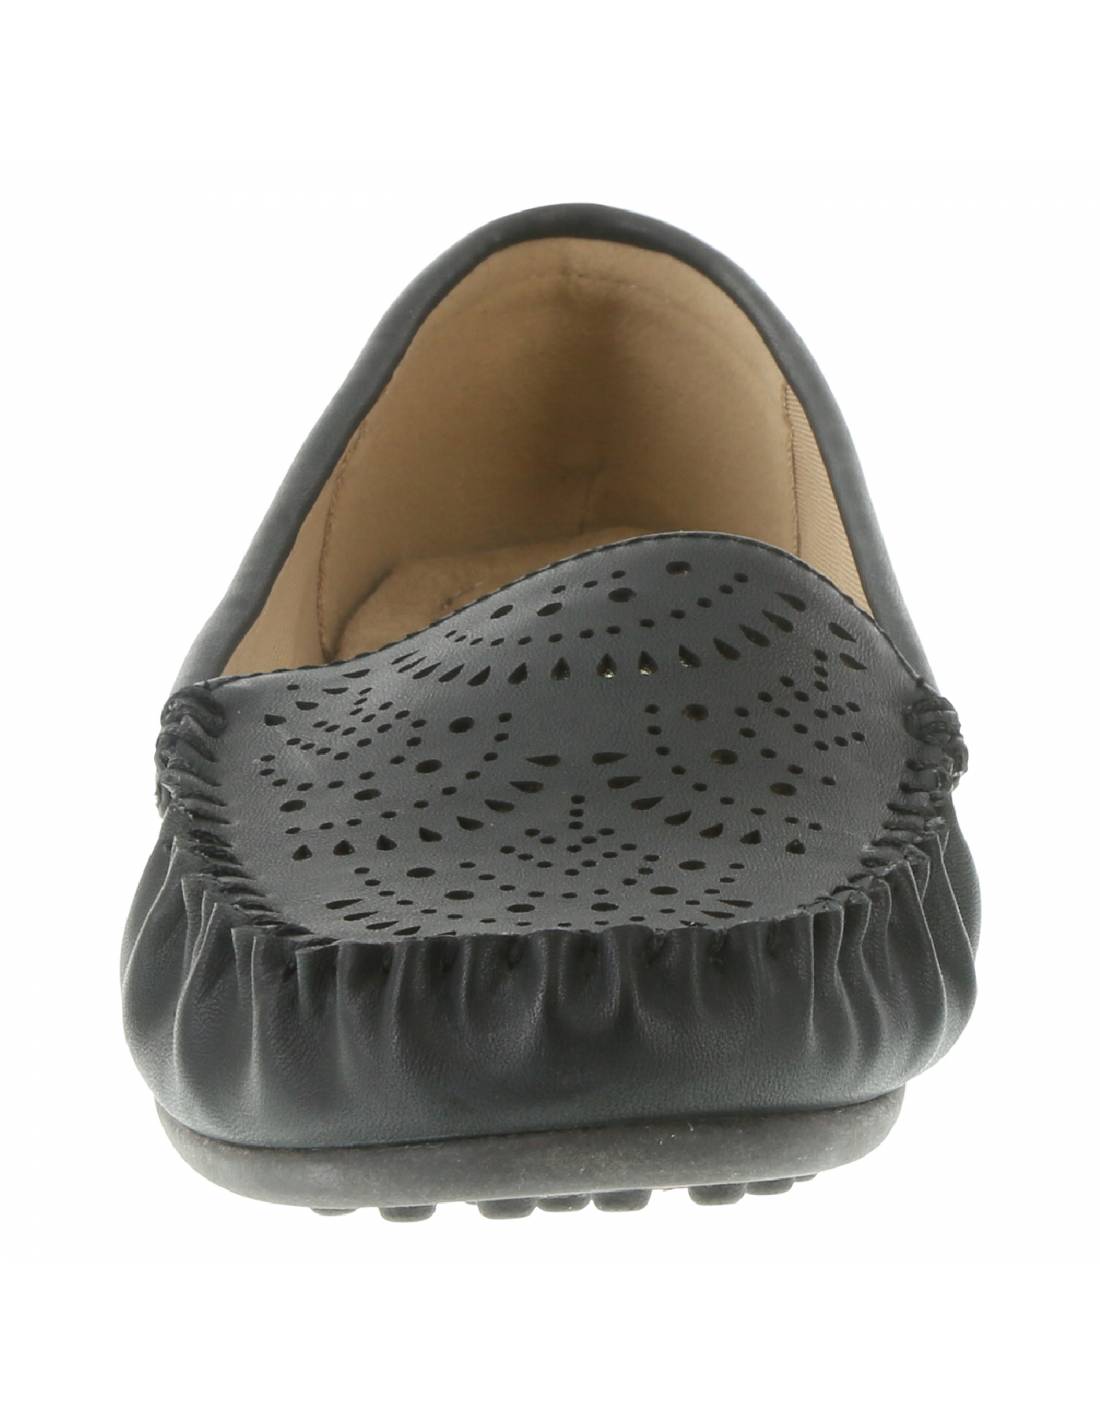 payless womens moccasins